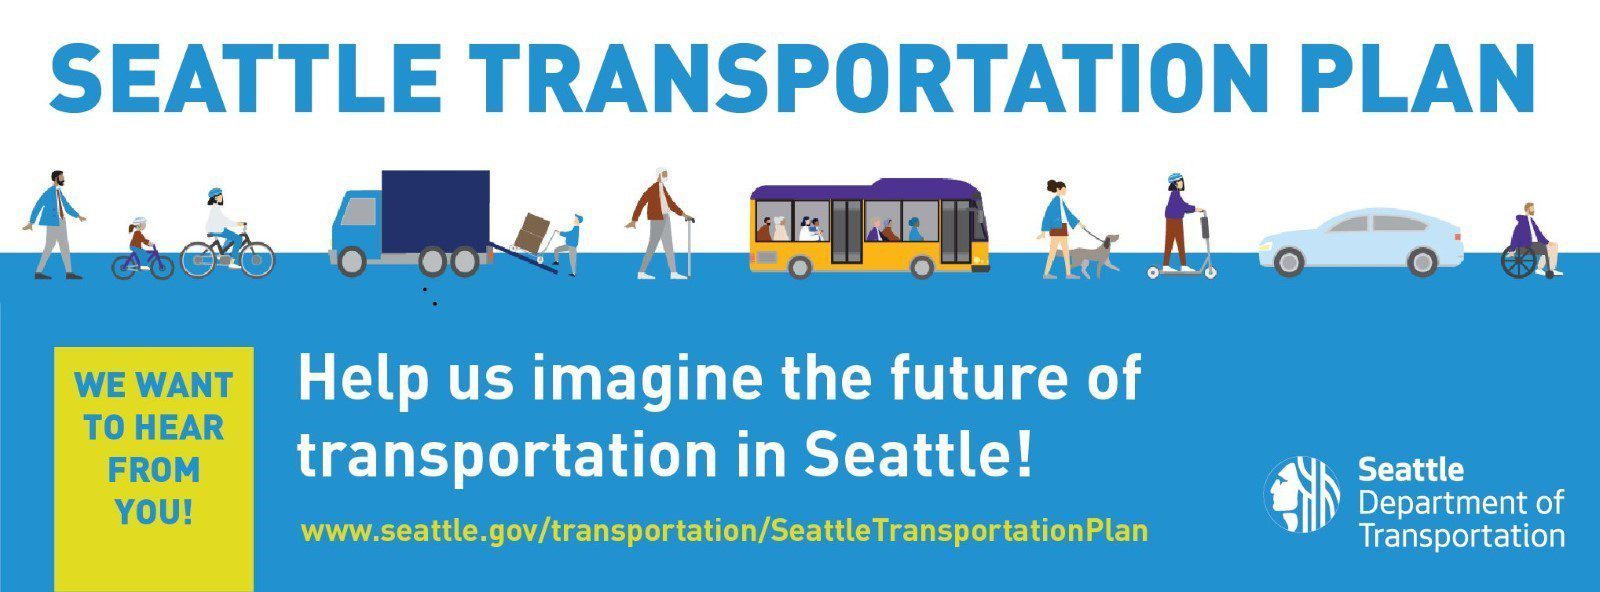 Graphic highlighting the Seattle Transportation Plan, and encouraging people to help us imagine the future of transportation in Seattle. The image includes icons of various modes of transportation, says that we want to hear from you, and includes the SDOT logo.